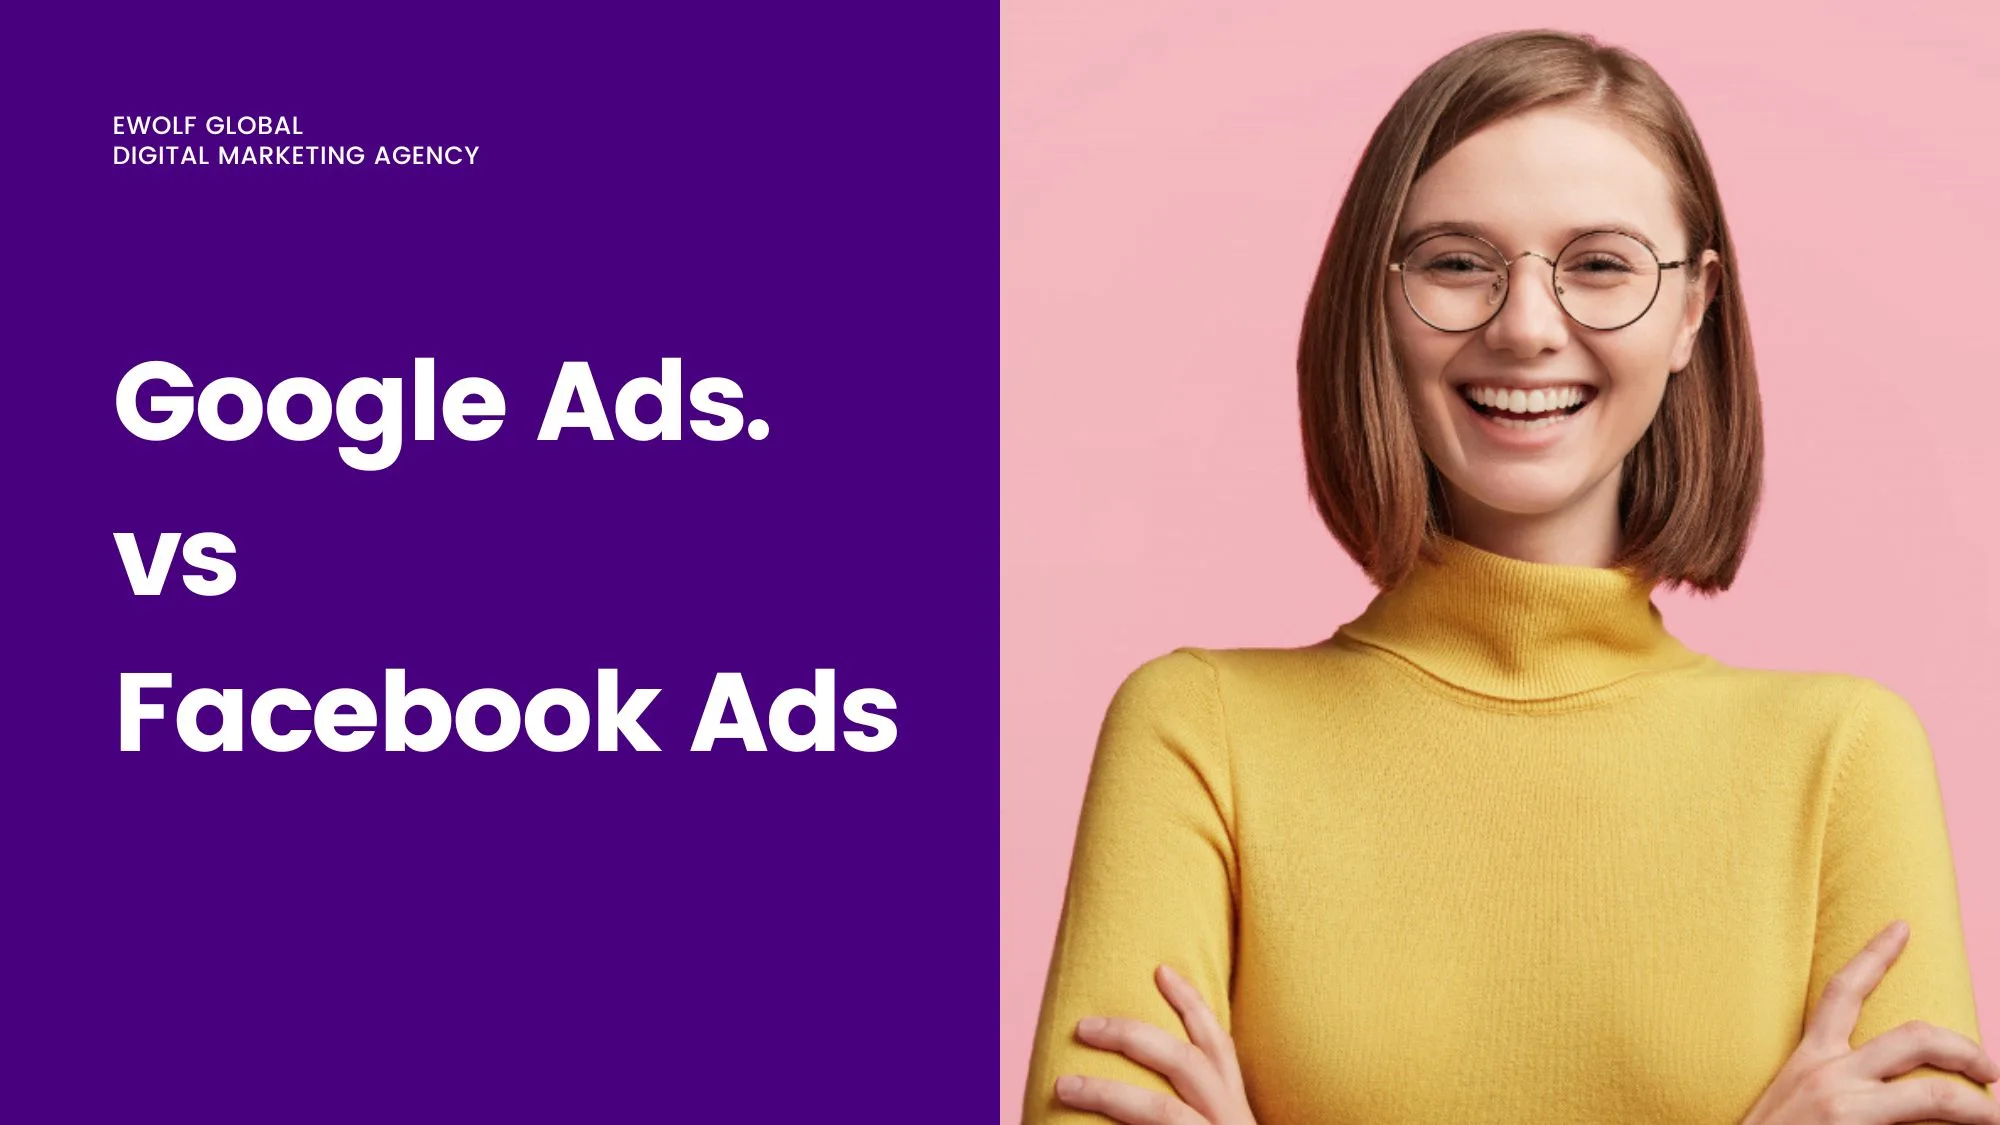 Google Ads vs. Facebook Ads: Which is Better?